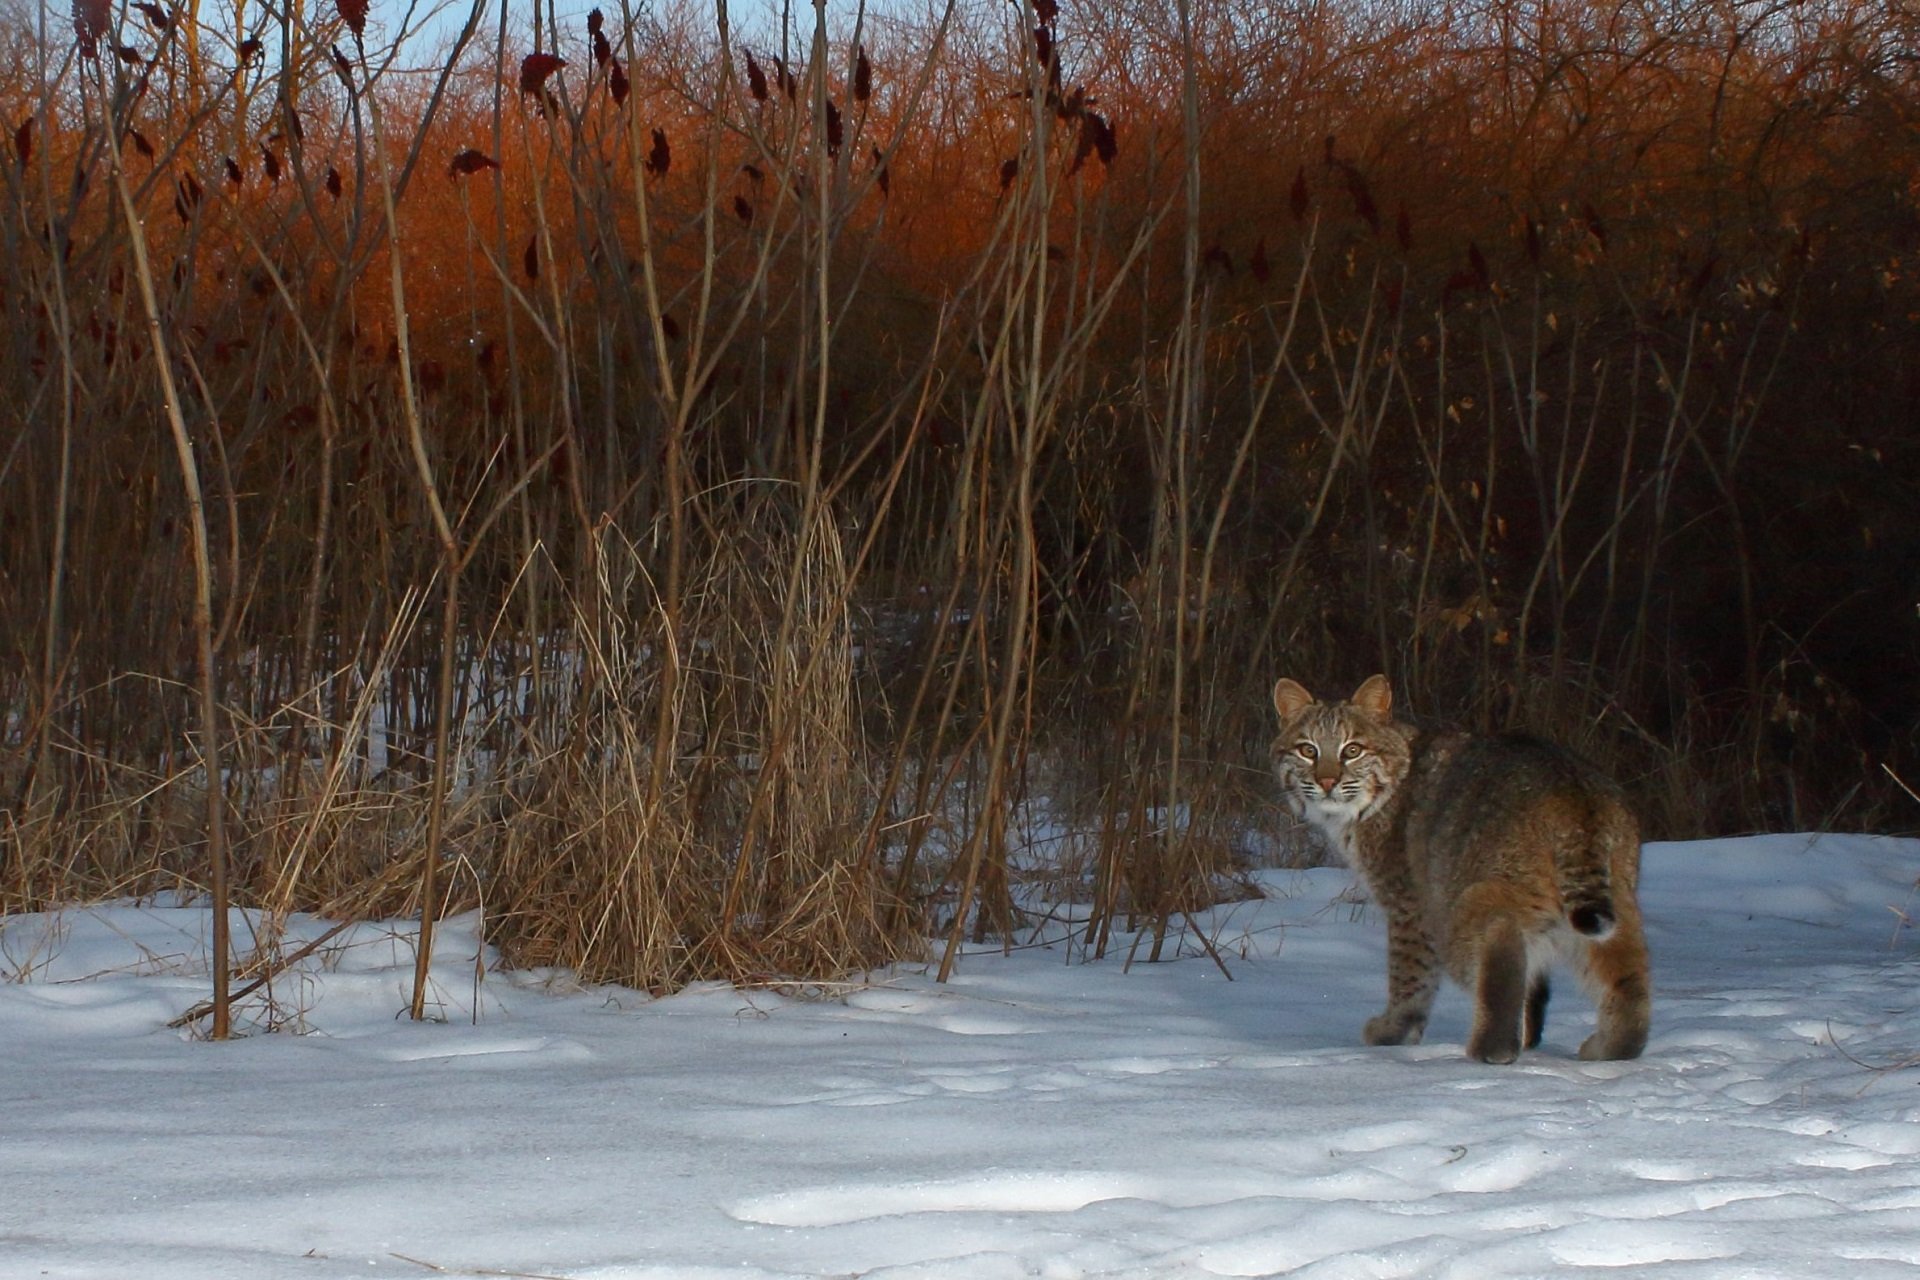 Bobcat in the snow by reeds, looking over its shoulder at photographer.